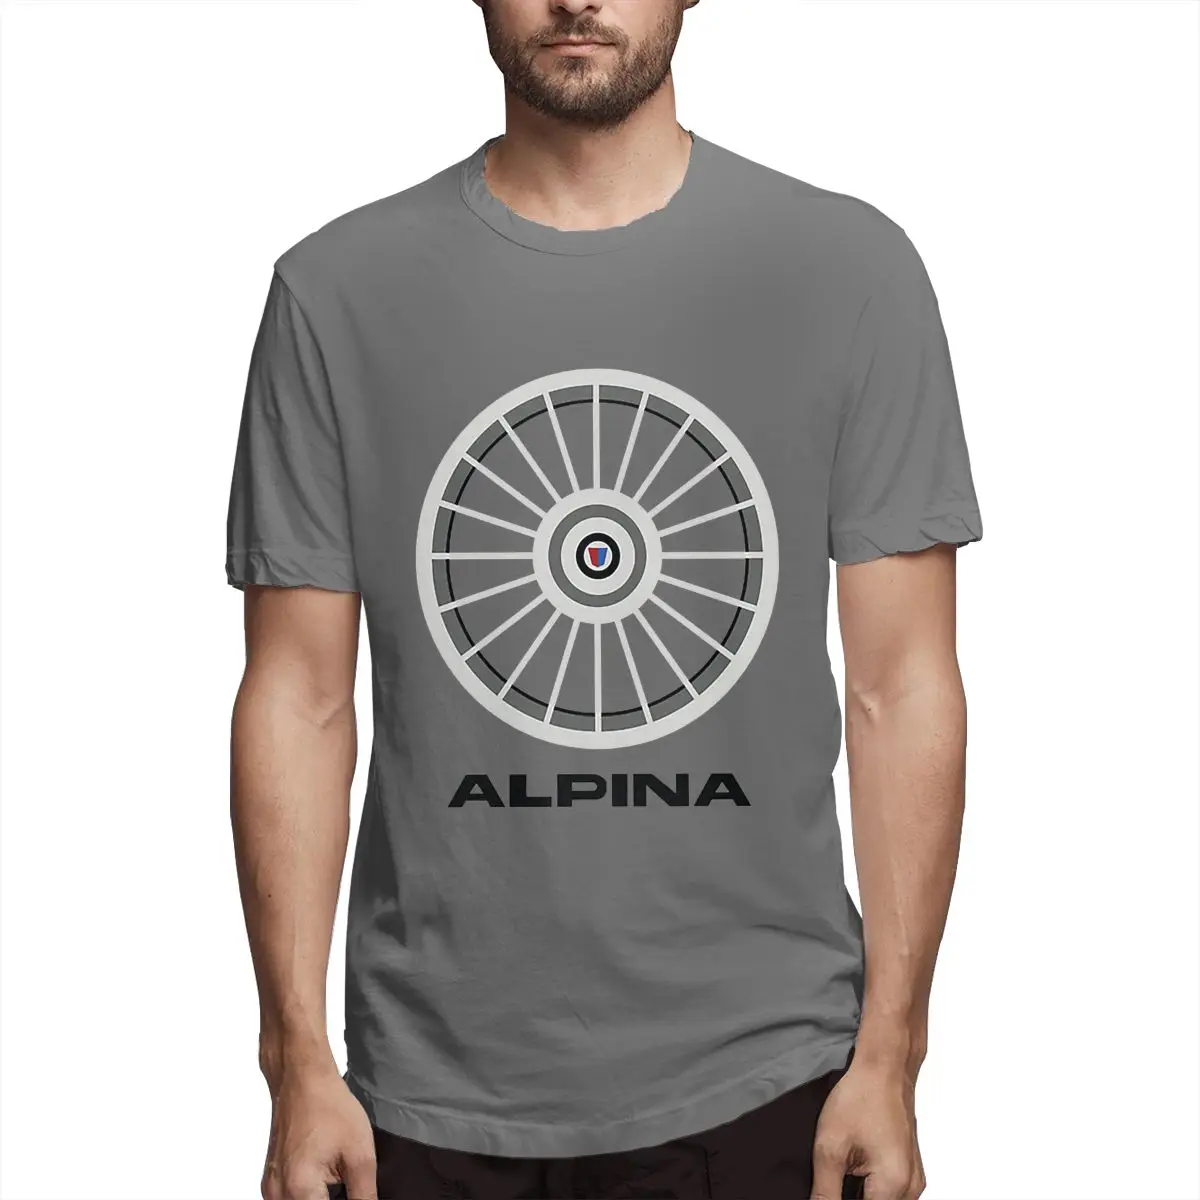 

Alpina Wheel Essential T Shir Car Culture Men's T Shirts Awesome Tees Short Sleeve Crew Neck T-Shirt 100% Cotton Summer Clothes